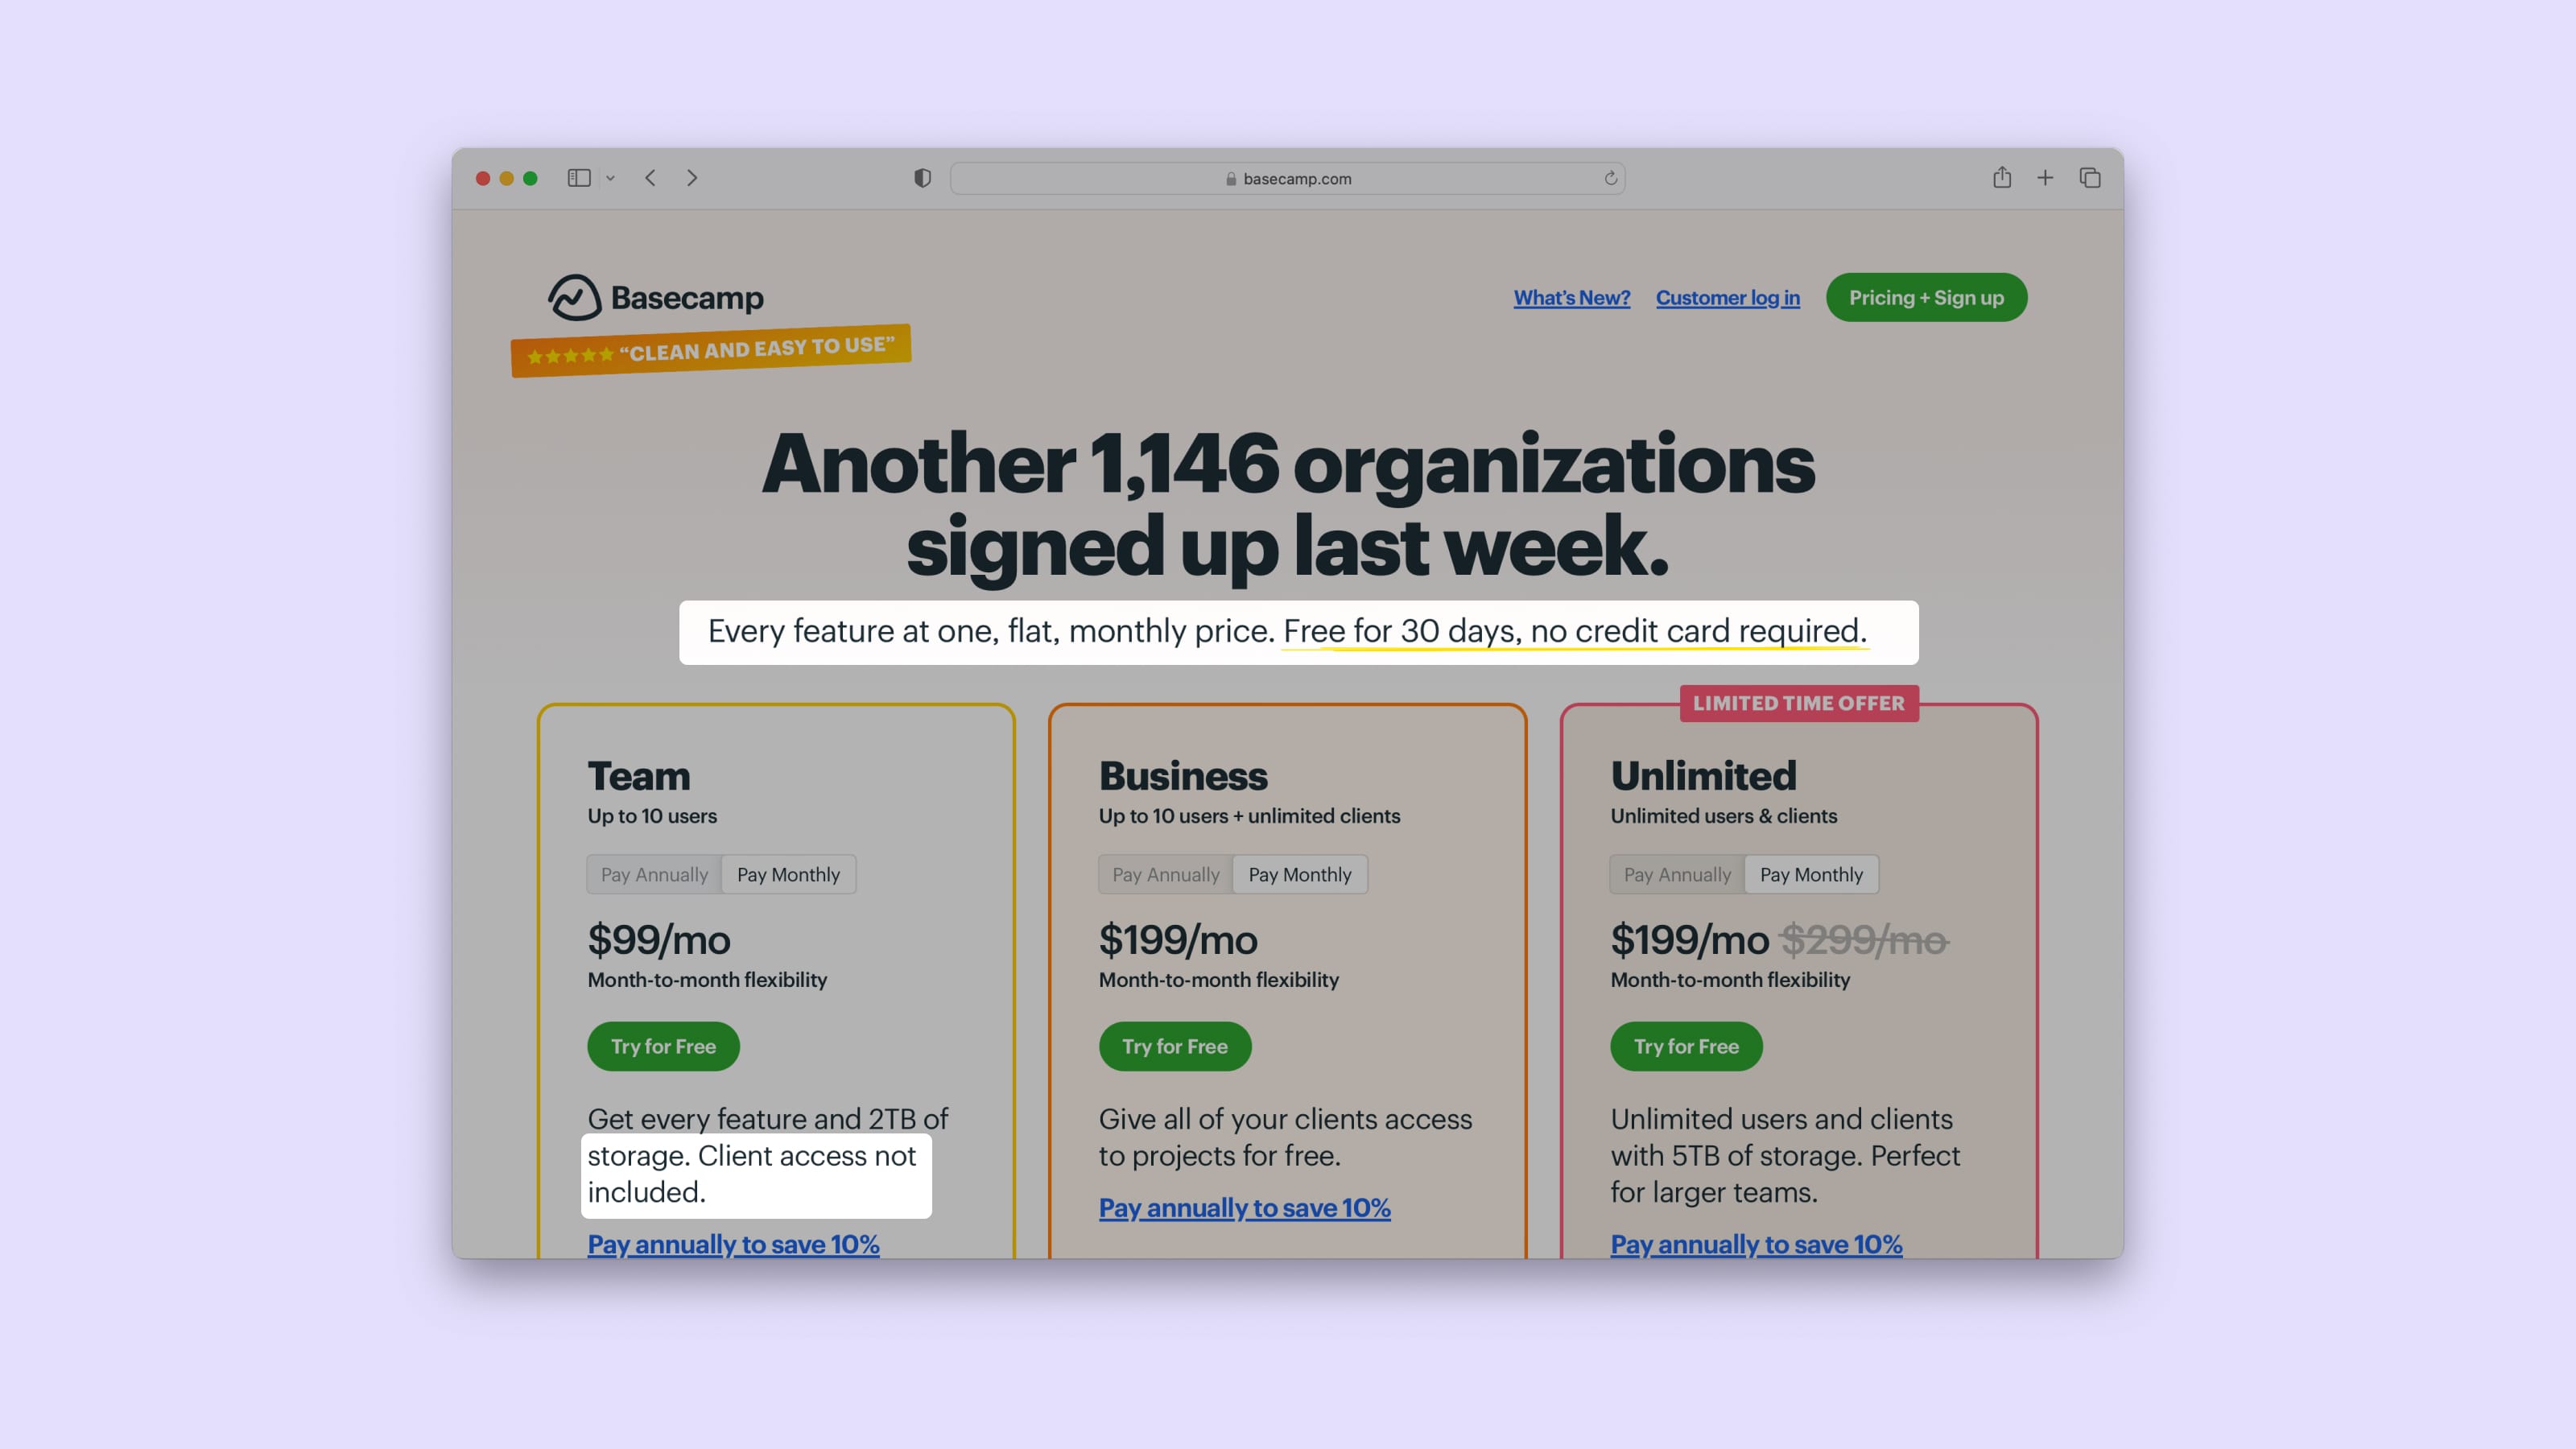 A screenshot of Basecamp's pricing page